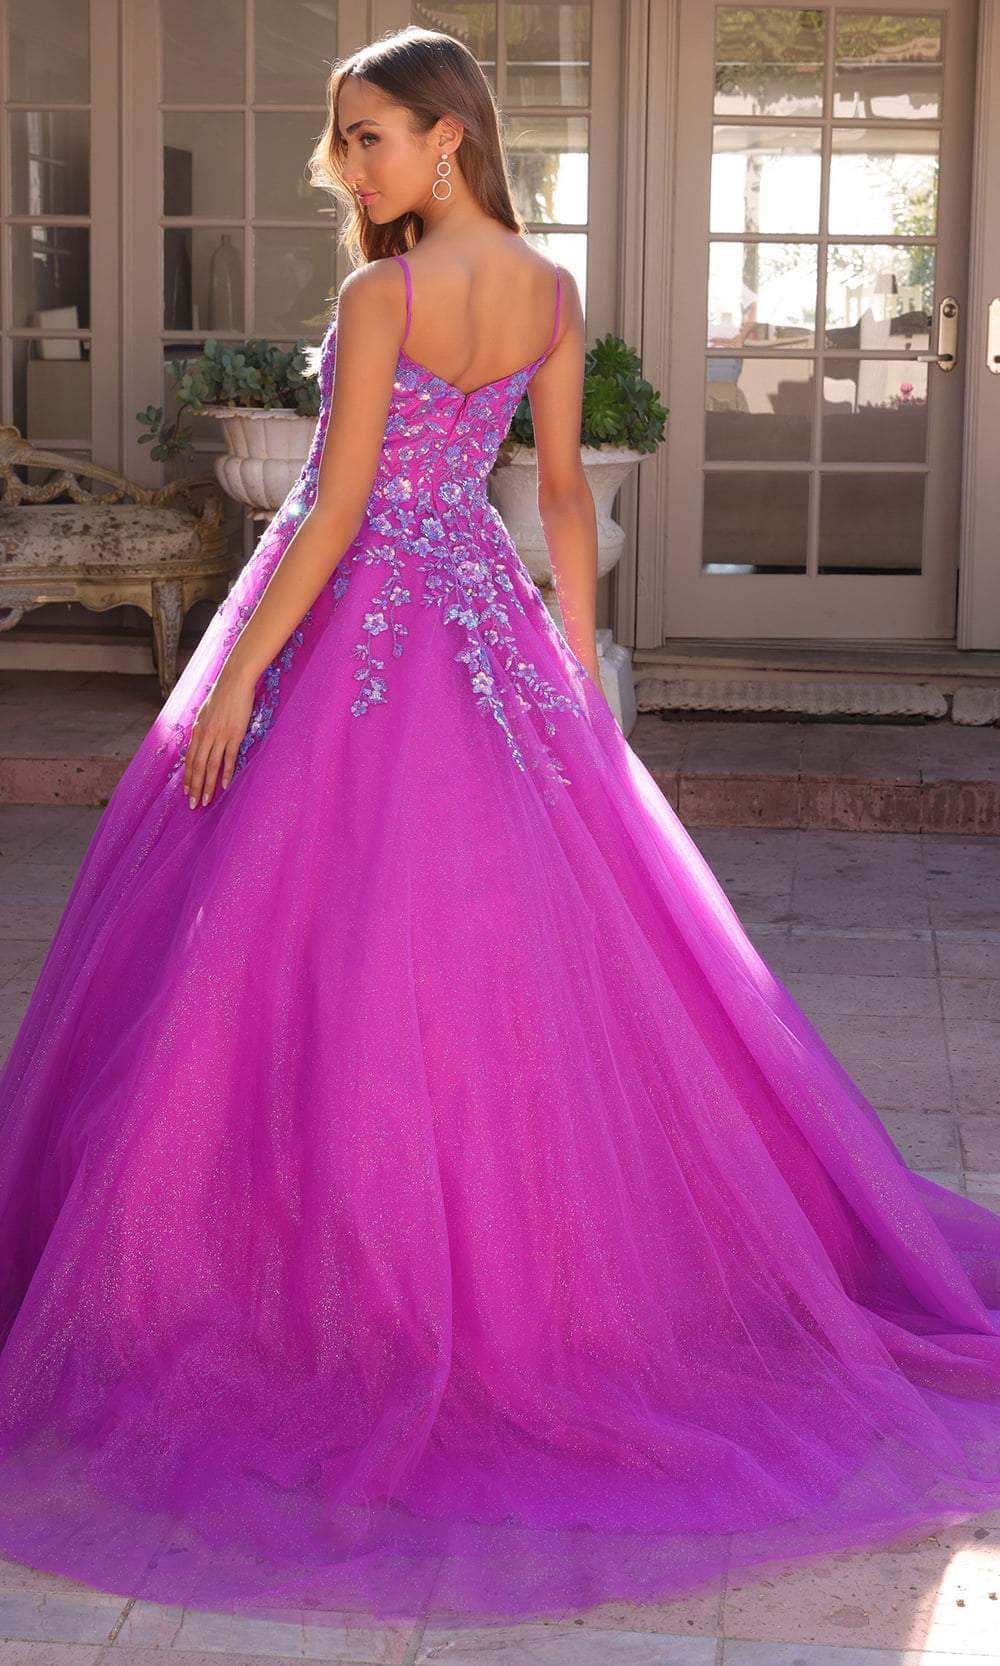 Nox Anabel H1464 - Glitter A-Line Prom Dress Special Occasion Dresses 